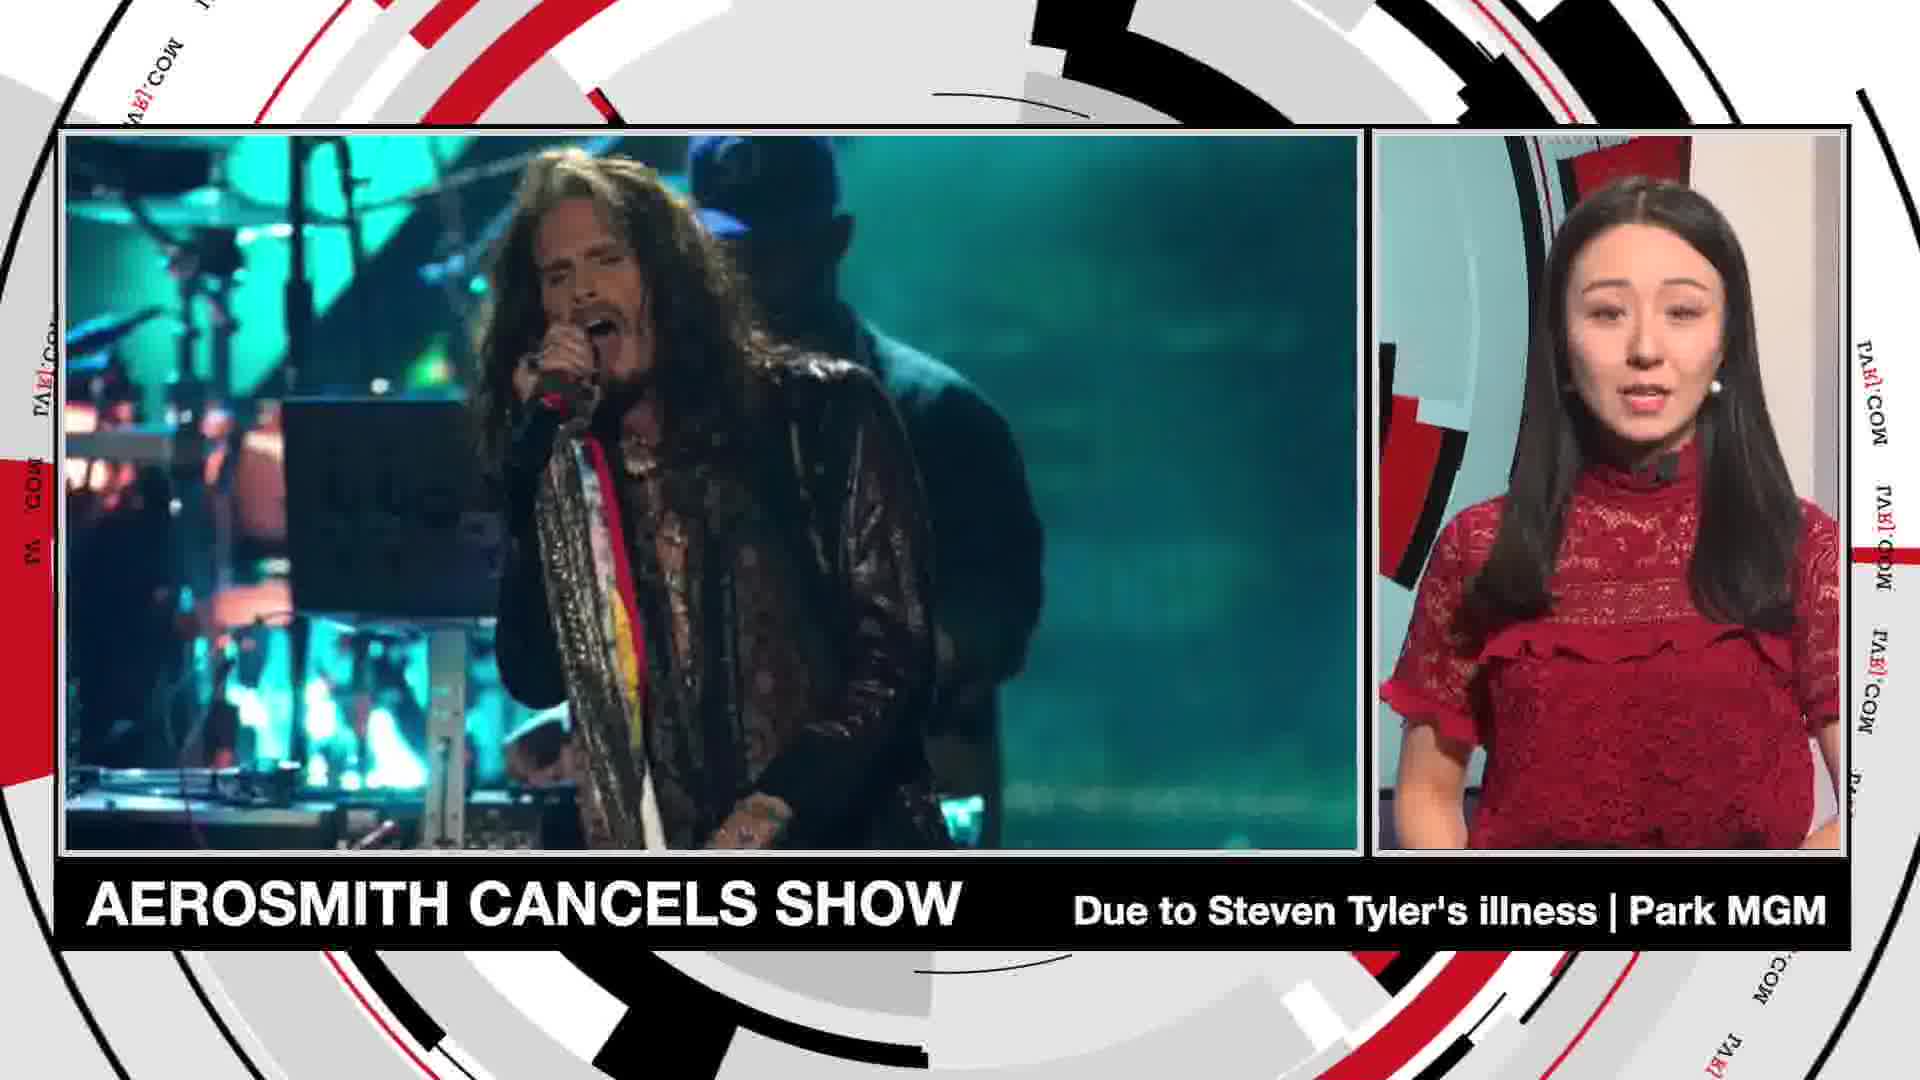 Aerosmith cancels shows and Clydesdale coming to Summerlin